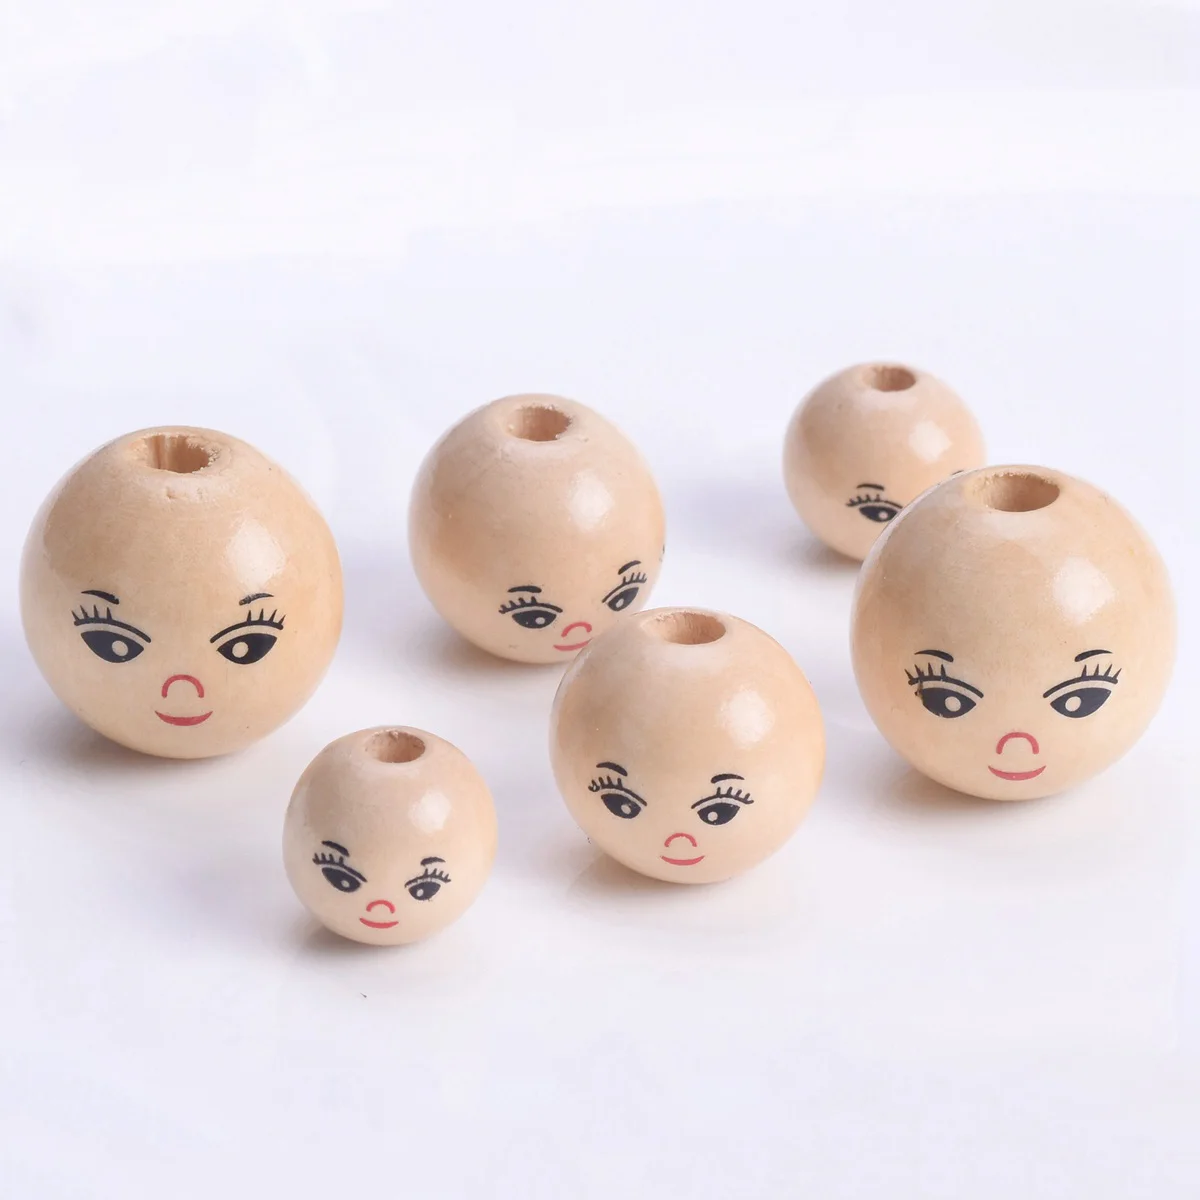 10pcs Round Girl Face Painting 14mm 18mm 22mm Natural Wood Loose Woodcraft Beads For Handcraft DIY Jewelry Making папка конверт а4 на кнопке girl s oil painting